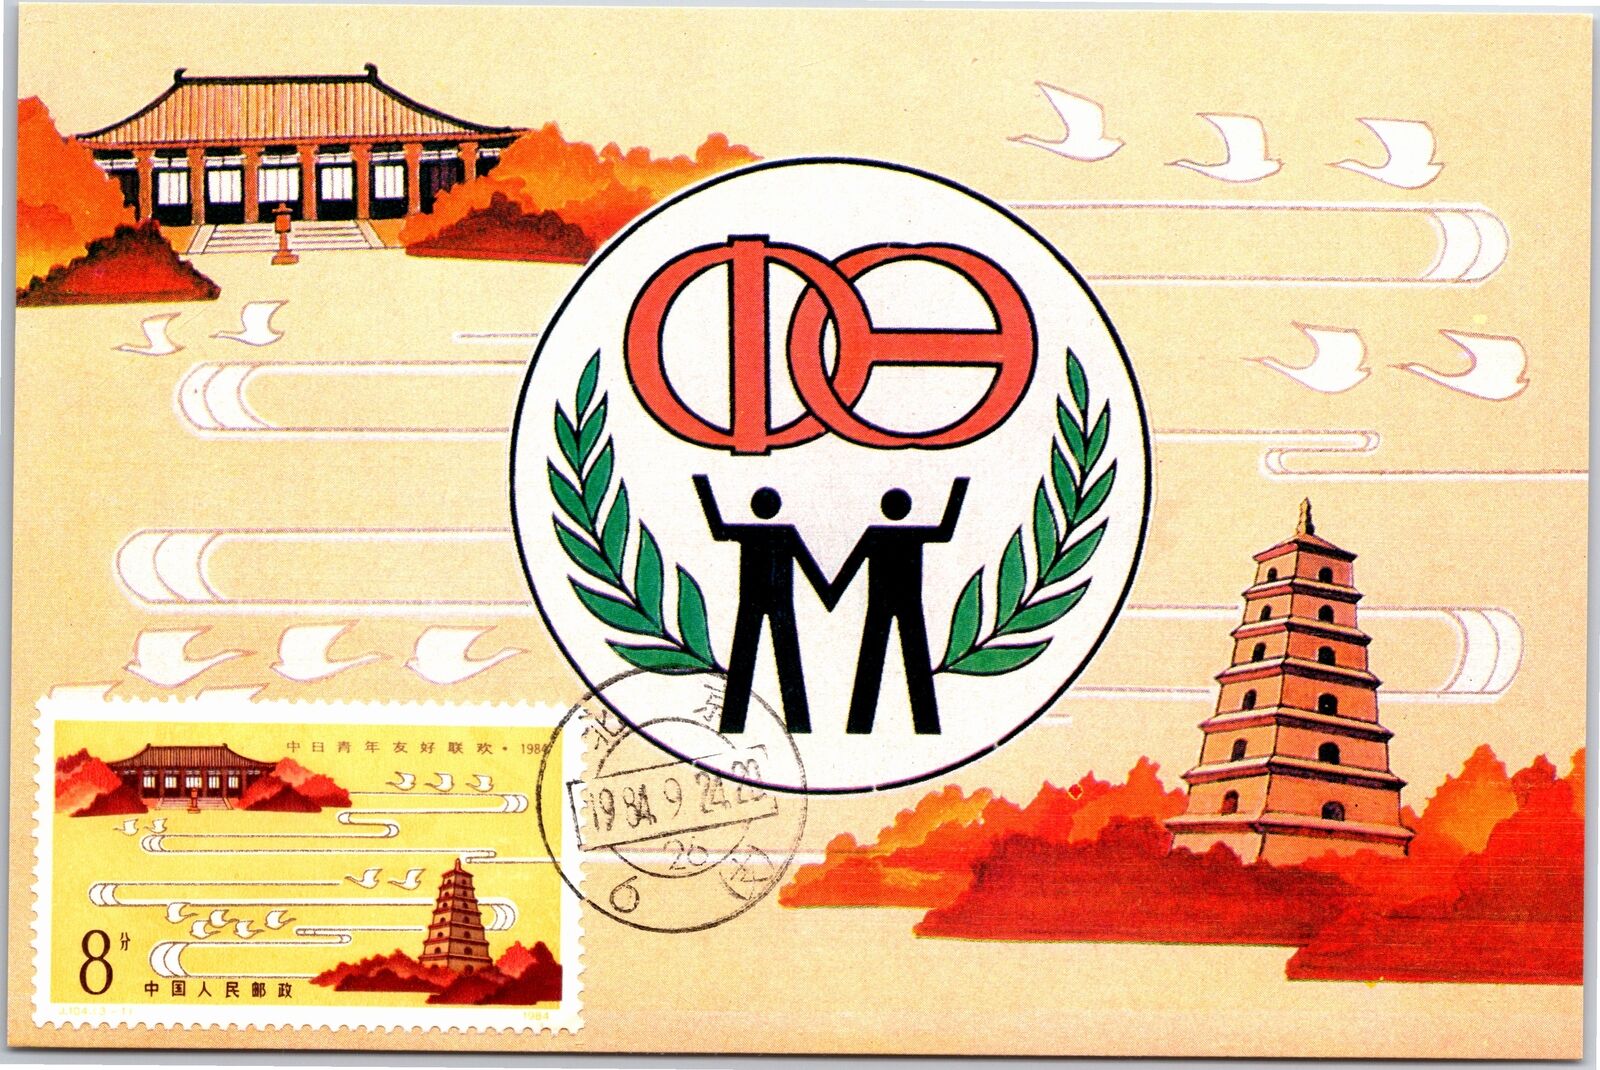 VINTAGE CHINA ILLUSTRATED STAMPED POSTAL CARD RELATIONS WITH JAPAN 1984